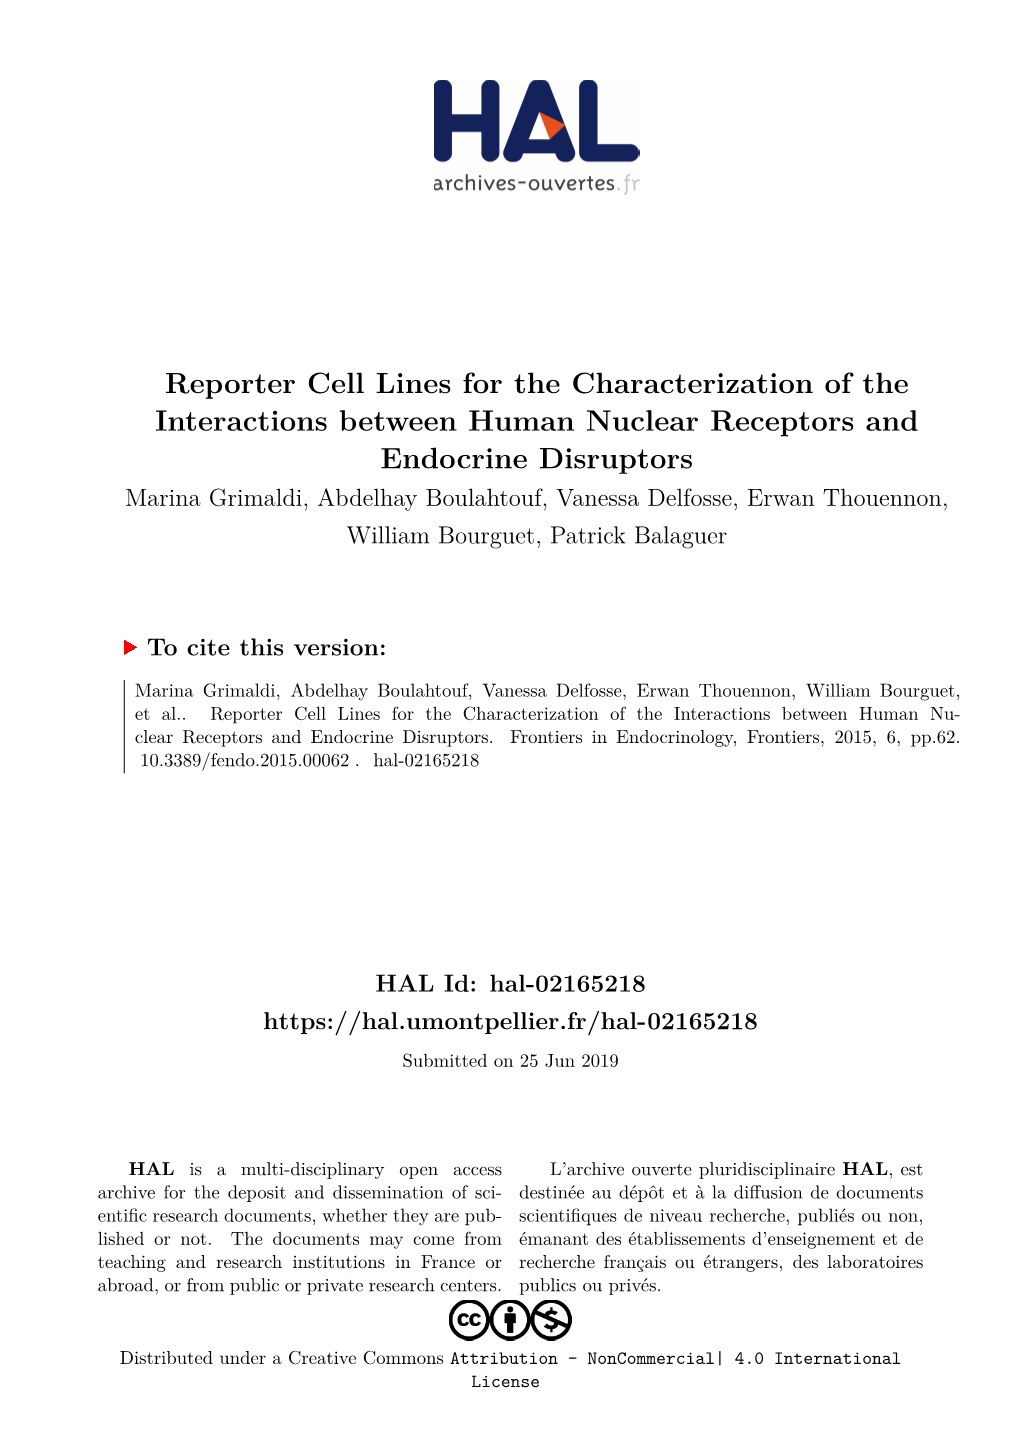 Reporter Cell Lines for the Characterization of the Interactions